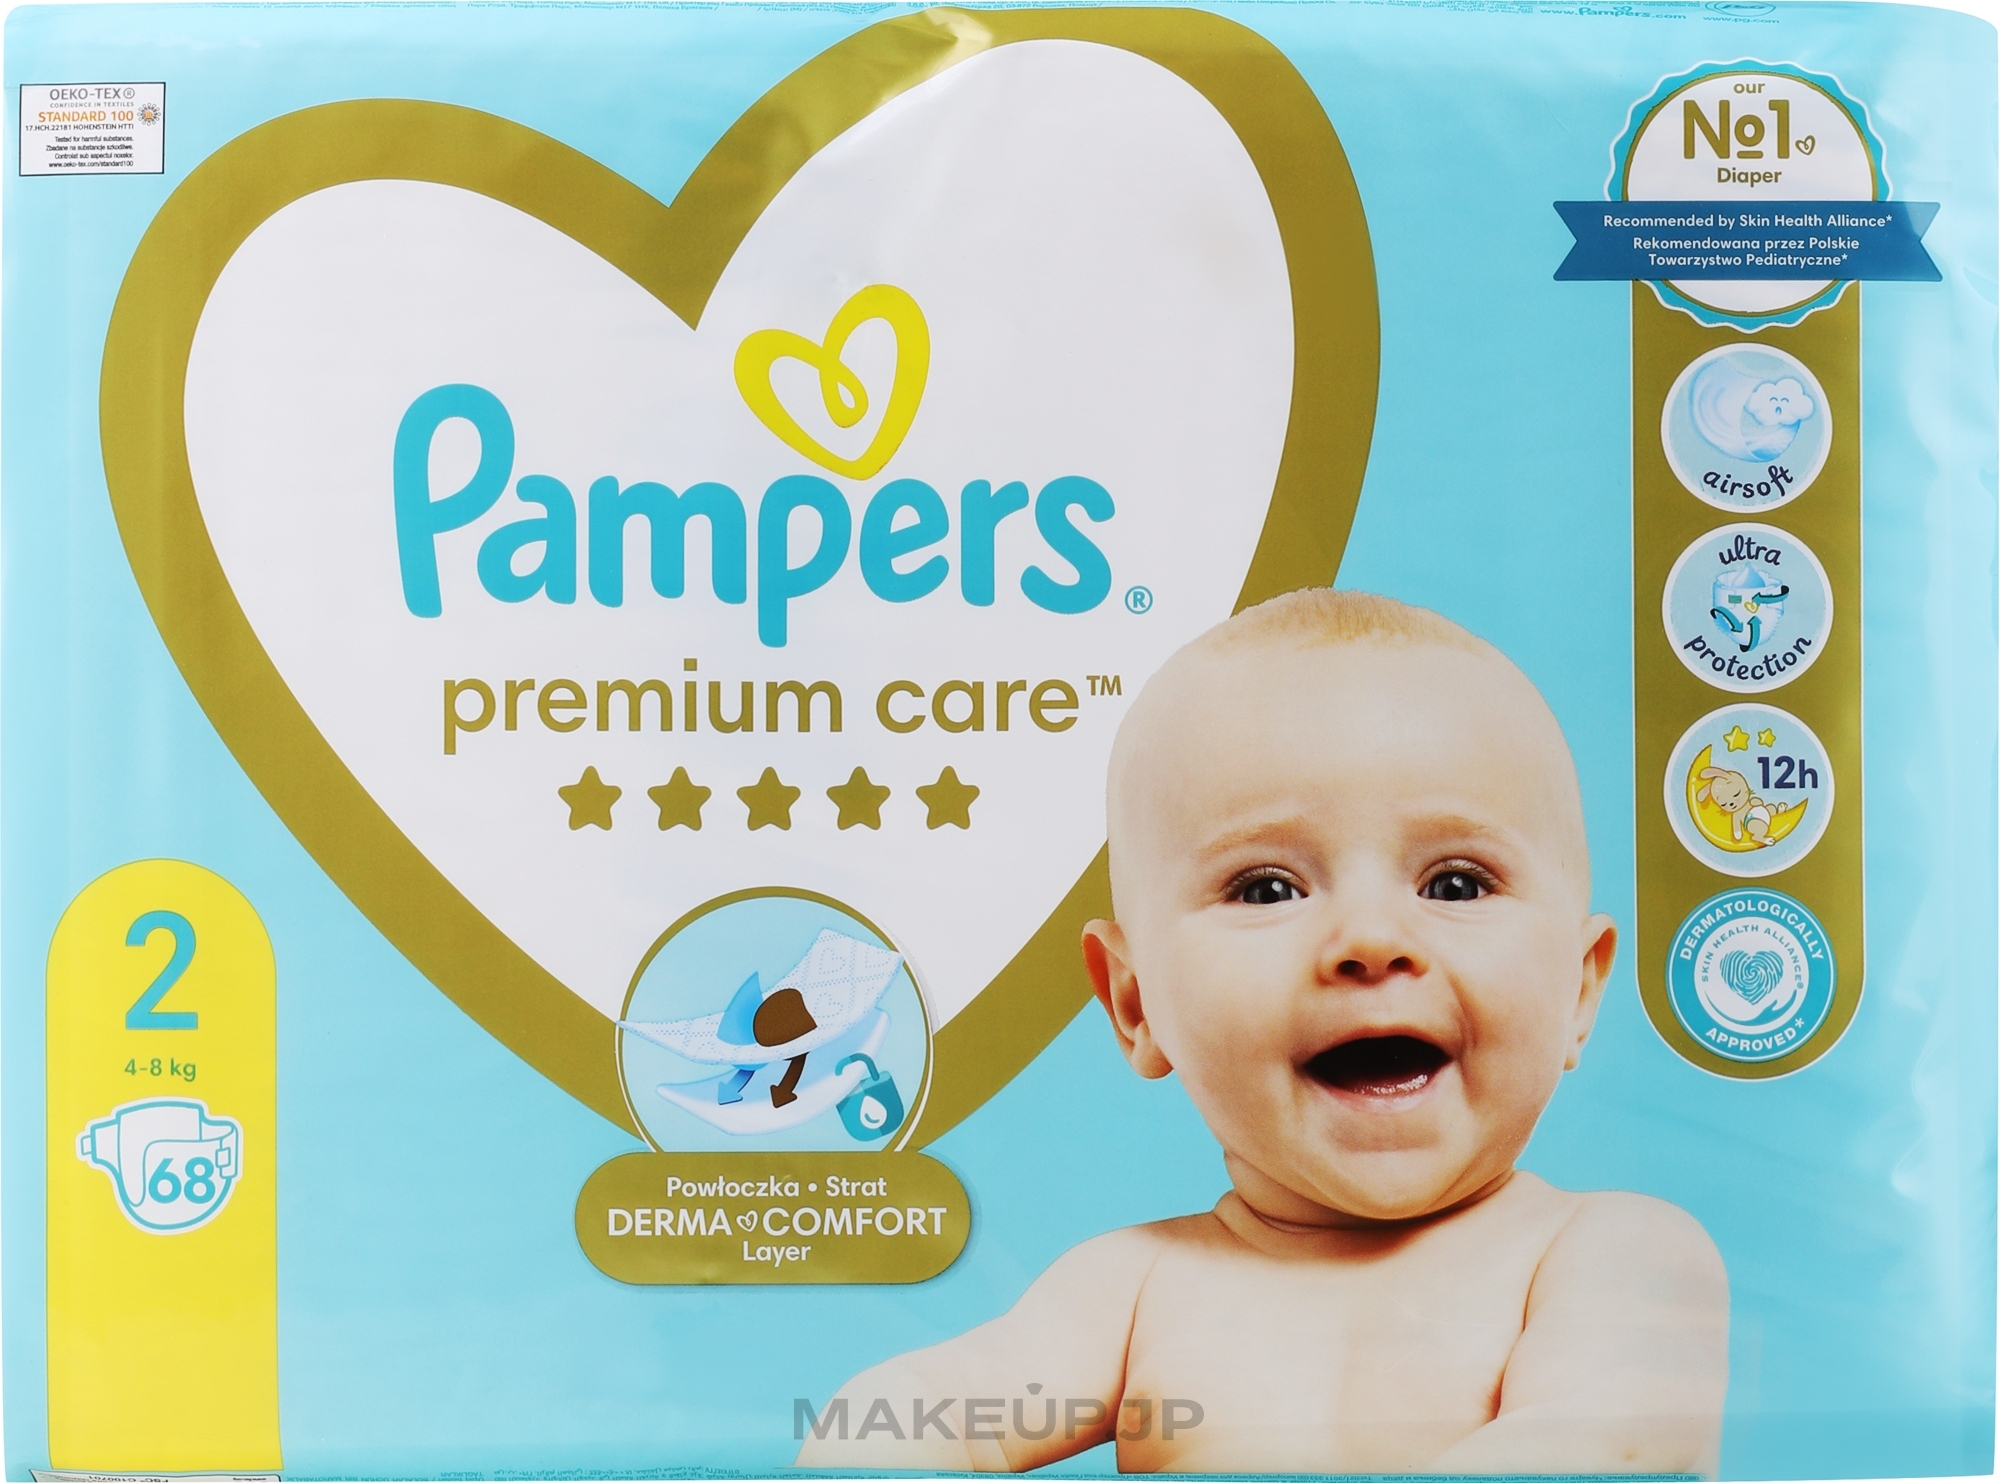 Pampers Premium Care Newborn Diapers (4-8 kg), 68 pcs - Pampers — photo 68 szt